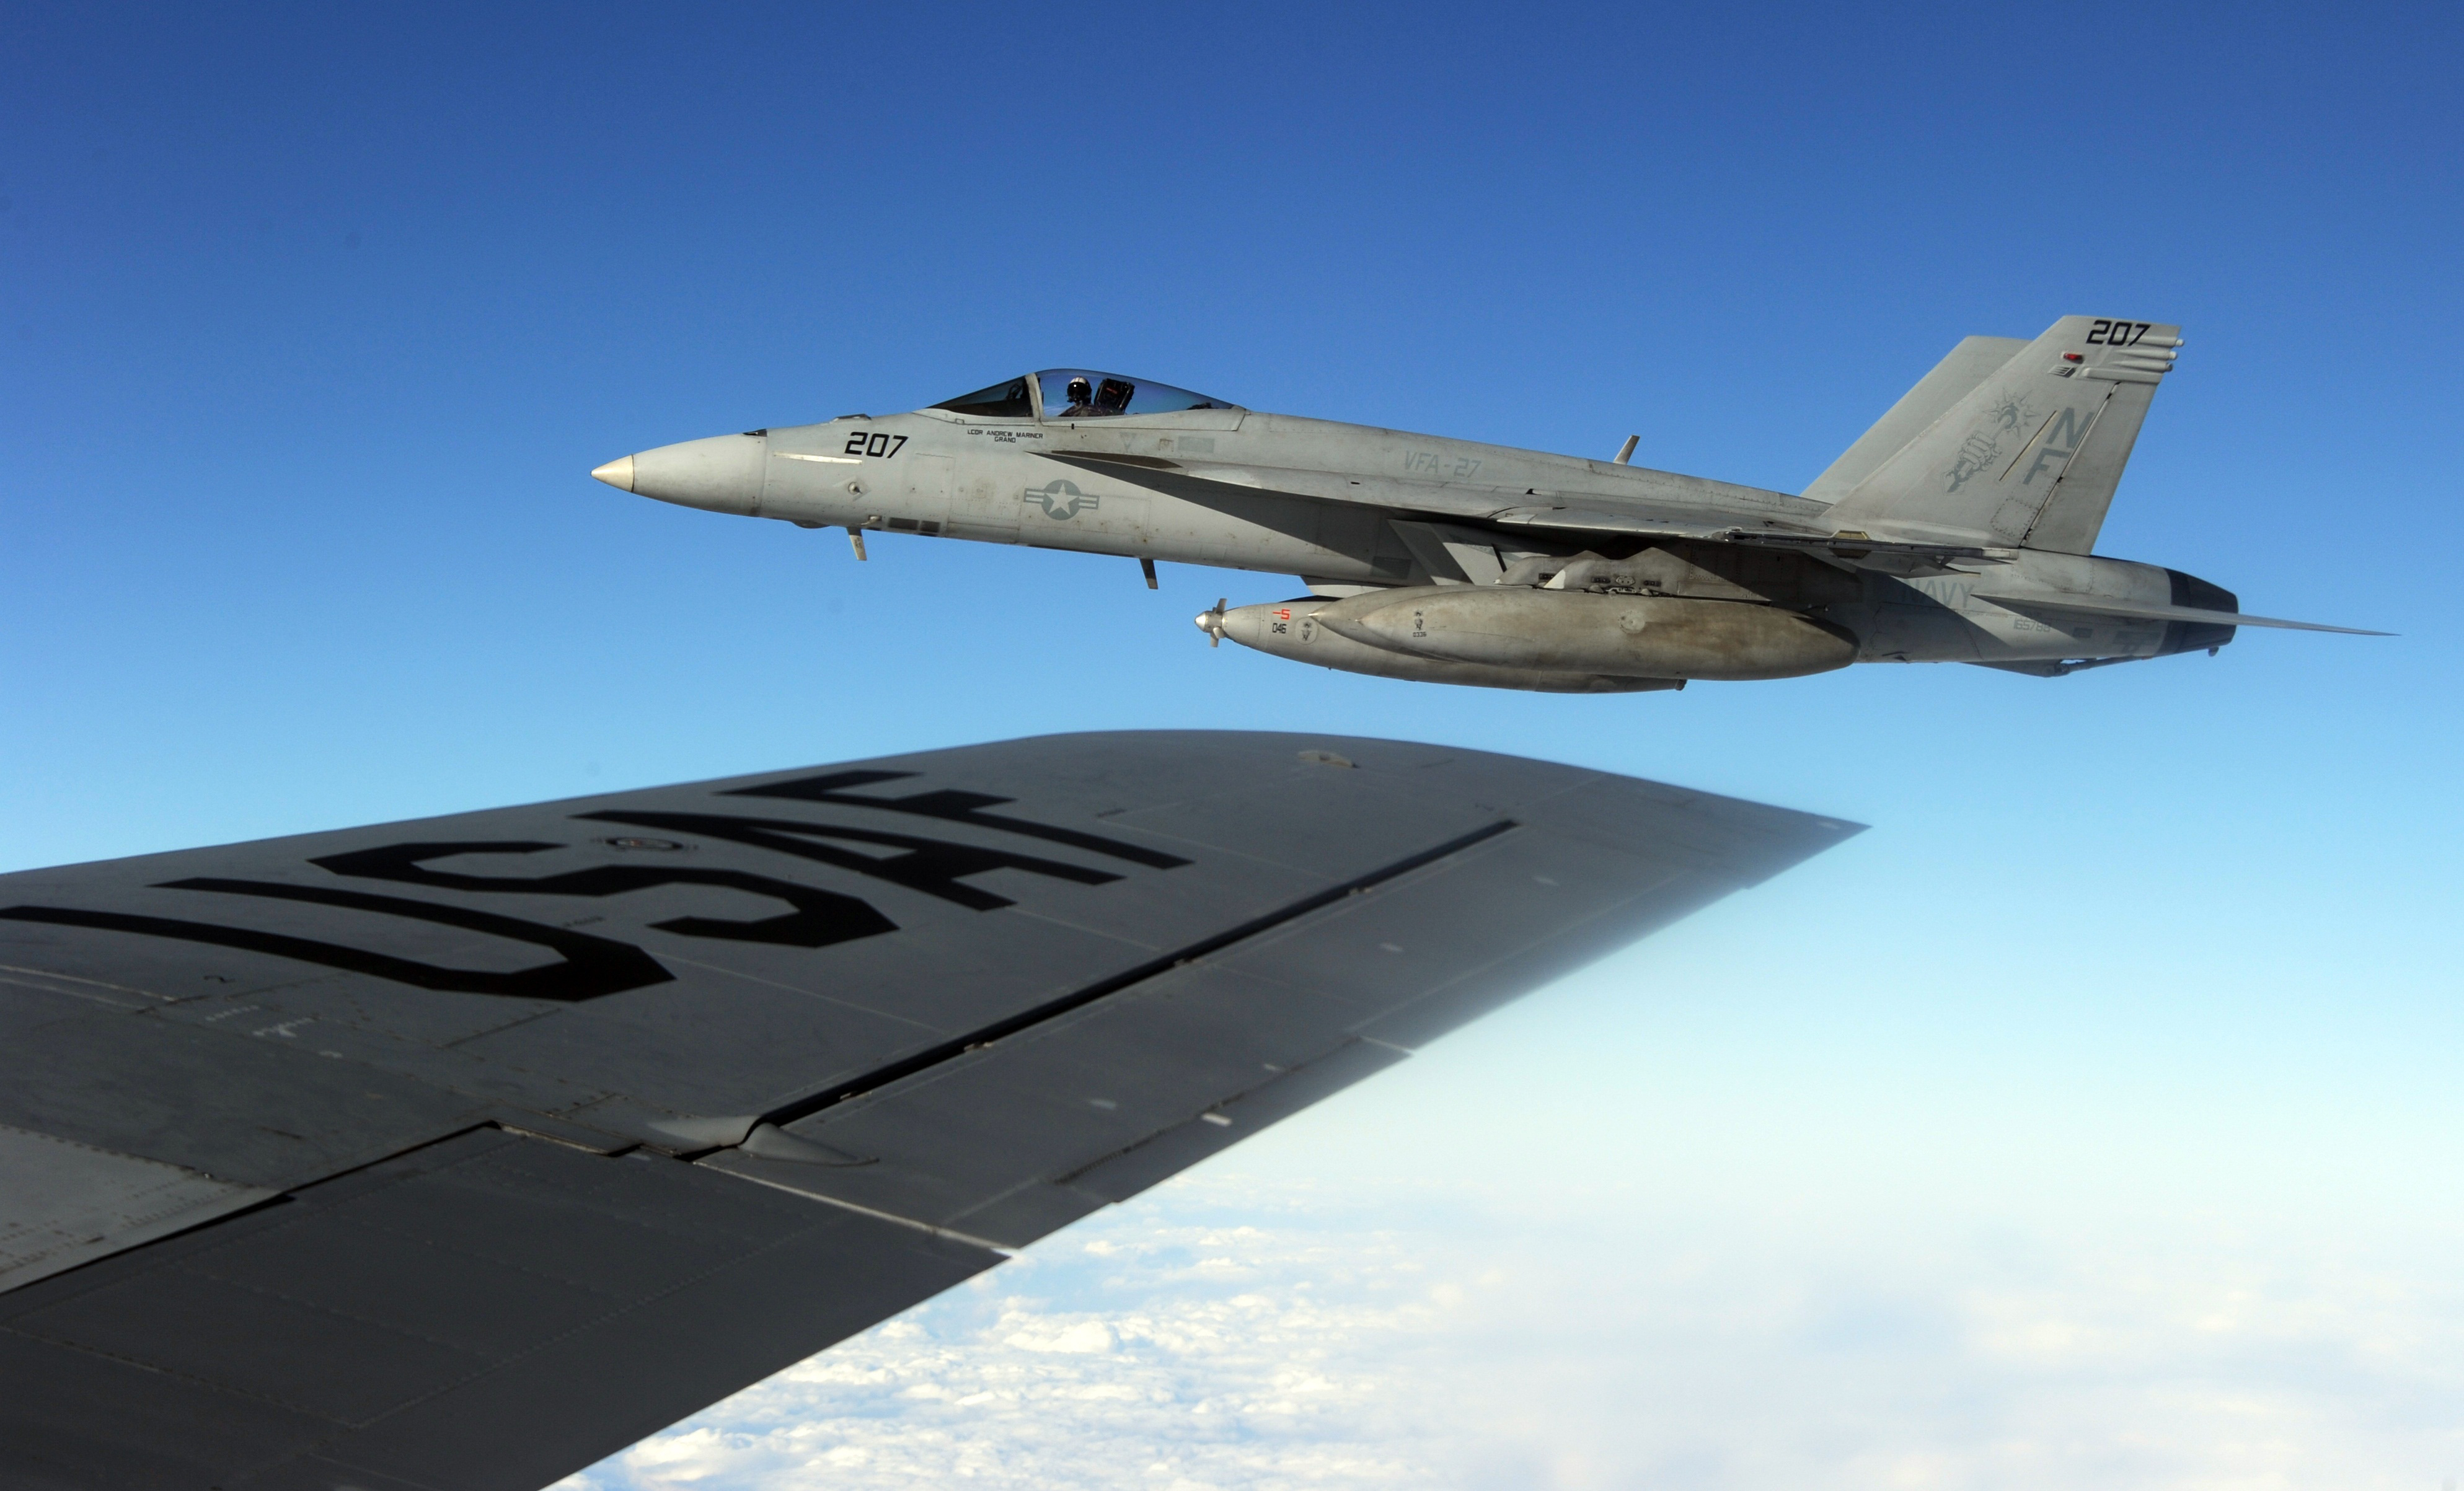 A US Navy FA-18 Super Hornet is seen from a KC-135 air refuelling tanker during 'Keen Sword', US-Japan military exercise above the South China sea on December 9, 2010. (Photo by TOSHIFUMI KITAMURA/AFP/Getty Images)